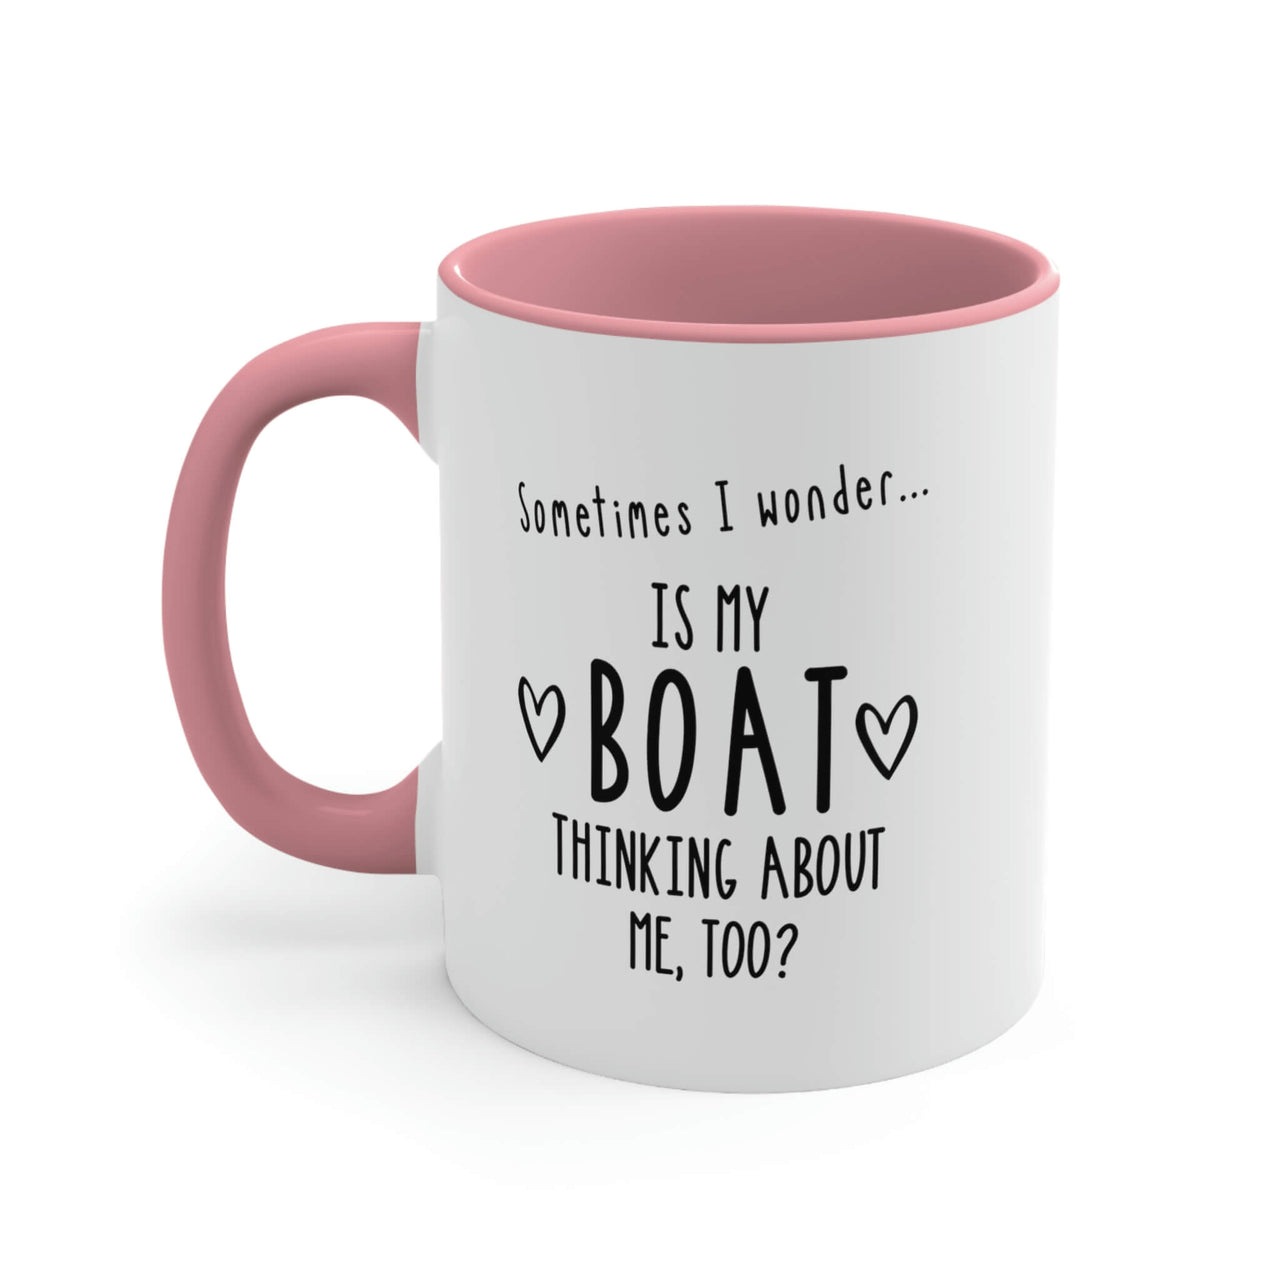 Is My Boat Thinking About Me Too Ceramic Coffee Mug, 5 Colors Mugs New England Trading Co Pink  